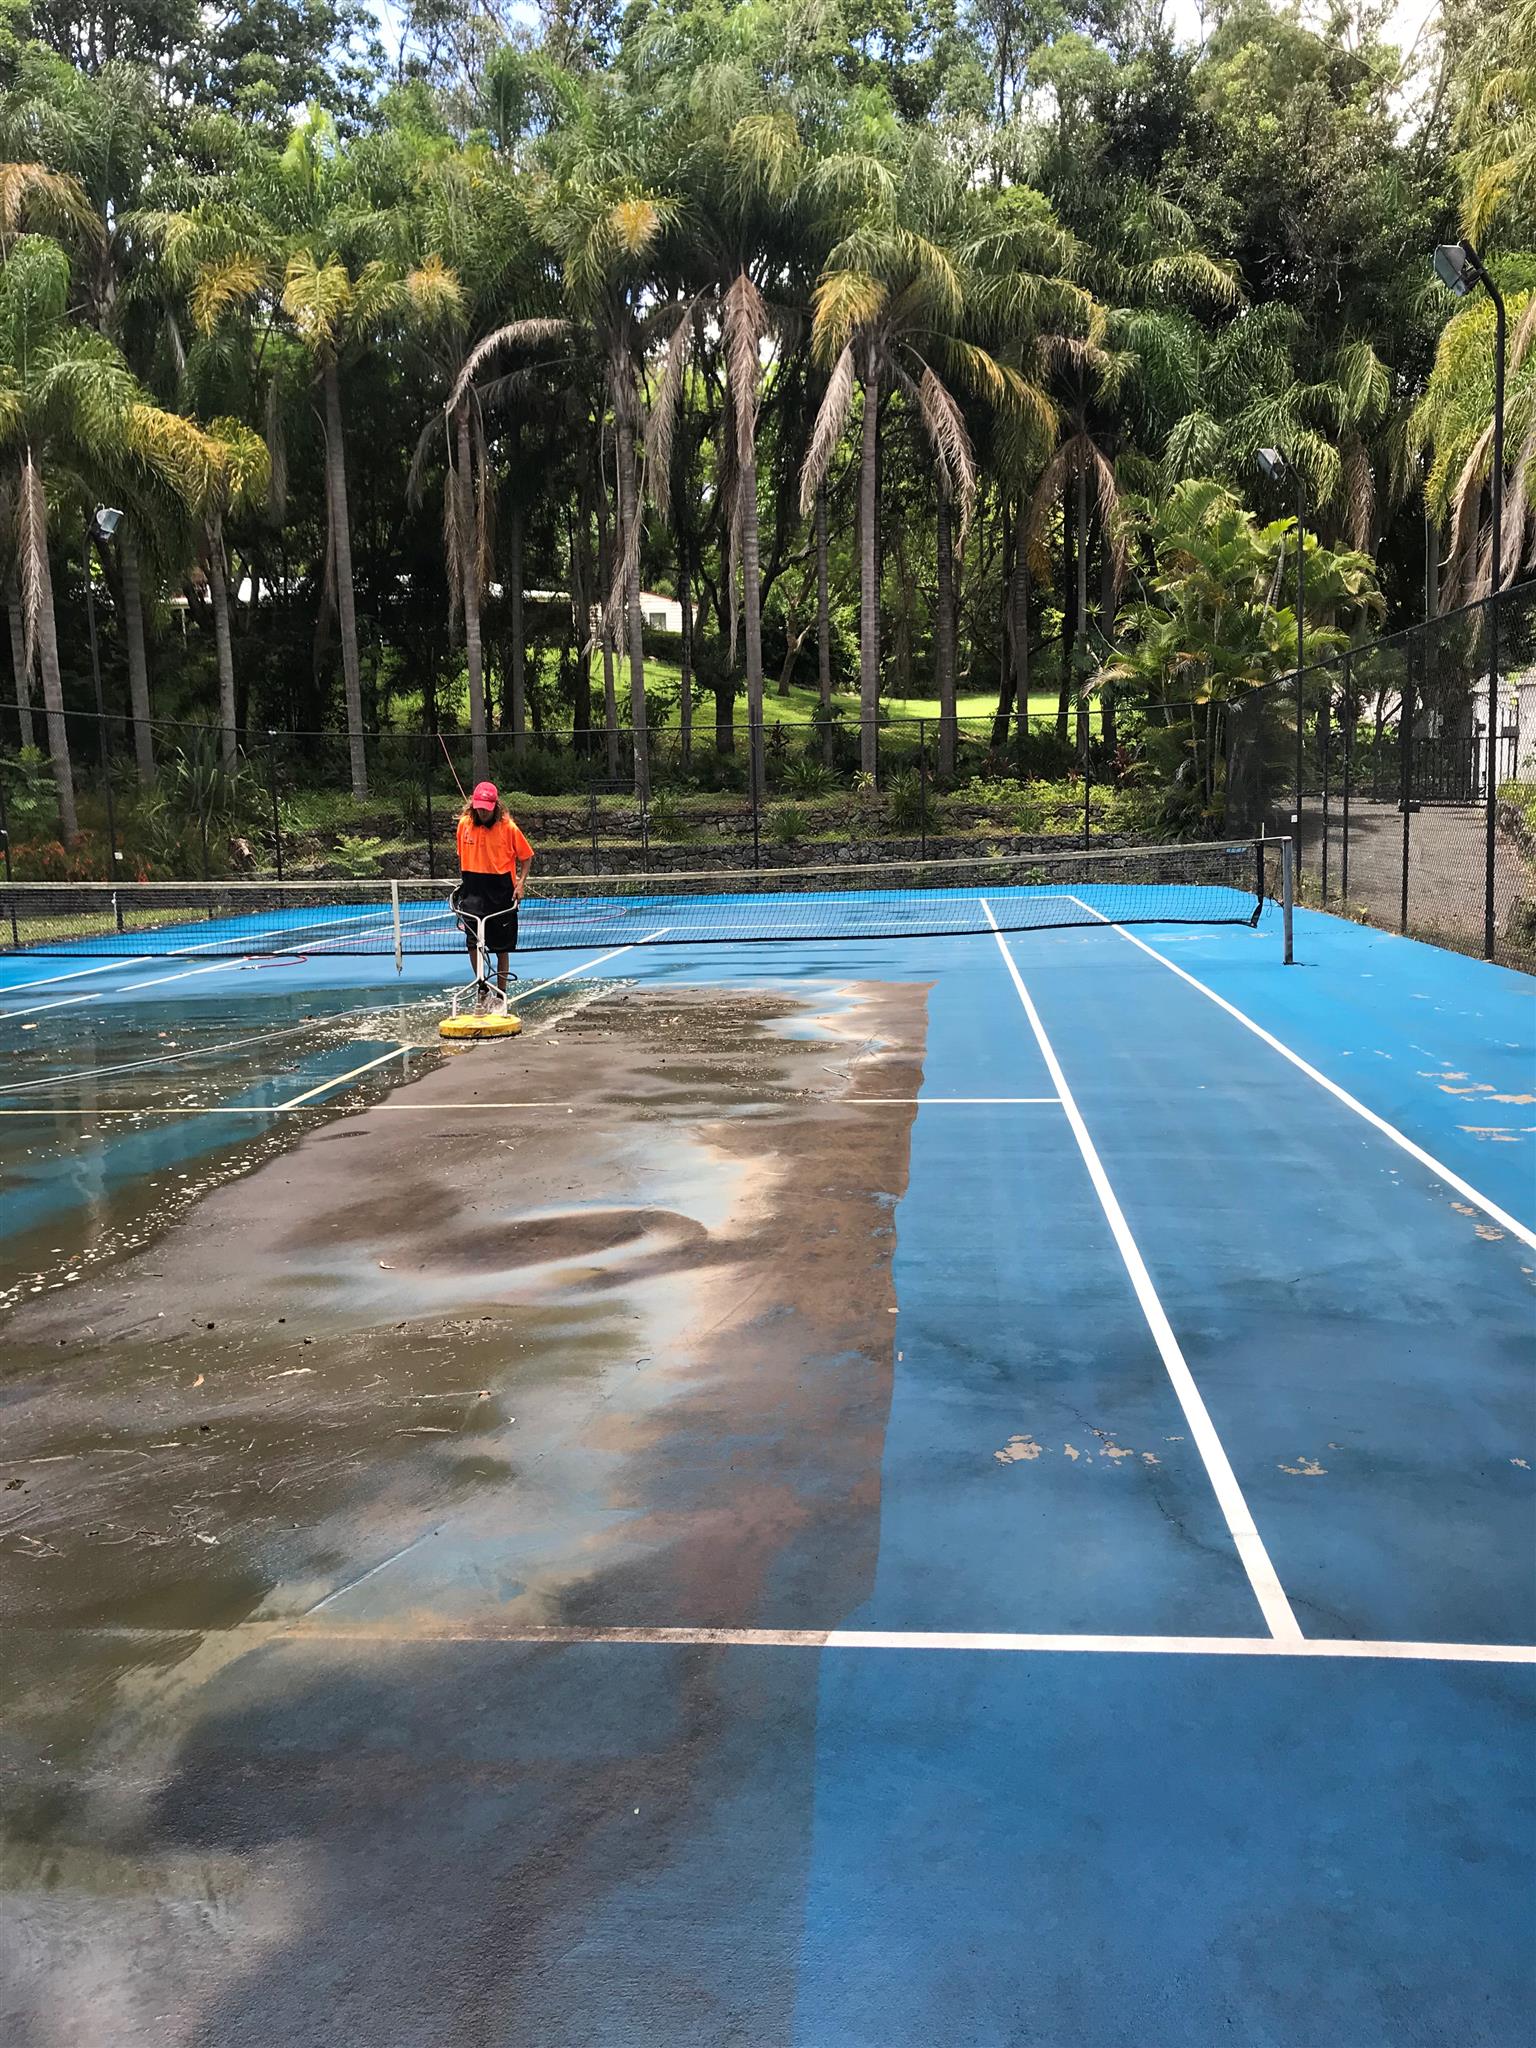 Pressure cleaning tennis court